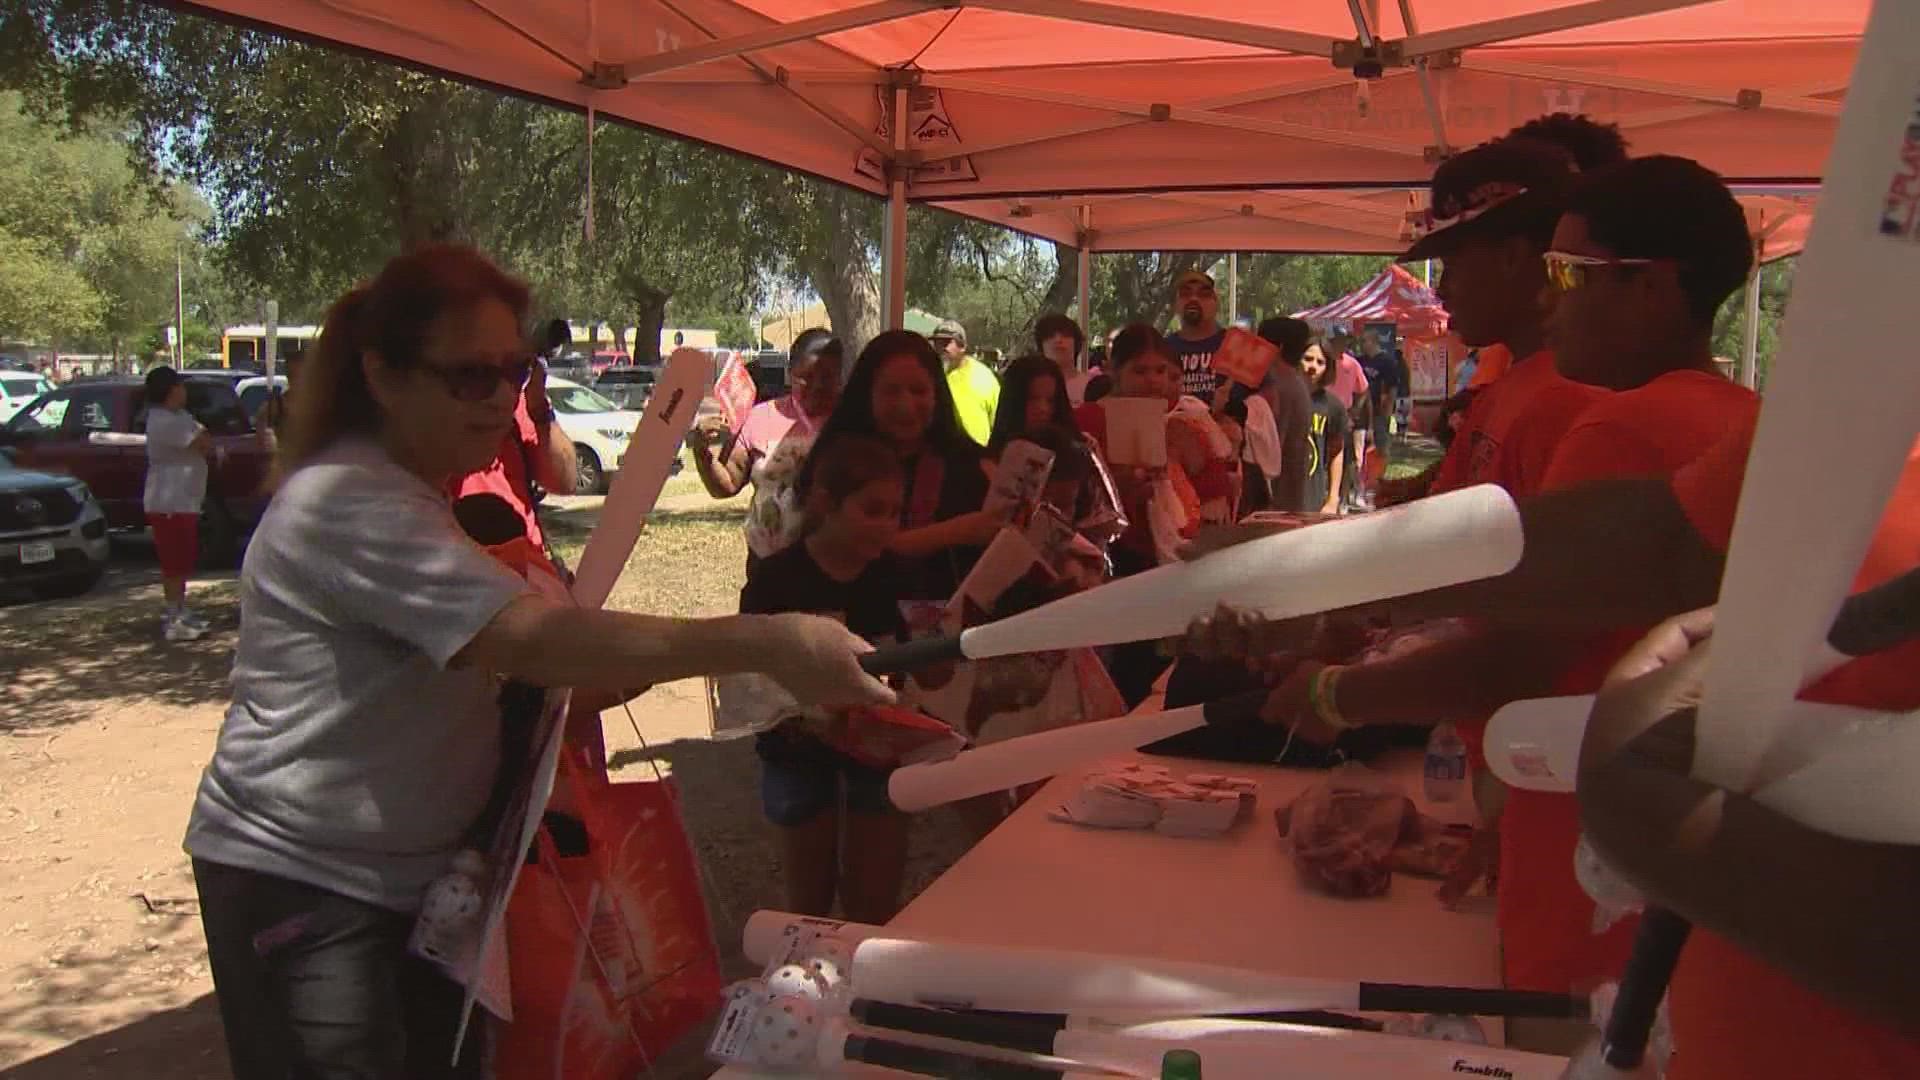 The Houston Astros took their turn, lending their hearts and kindness to the people of Uvalde.